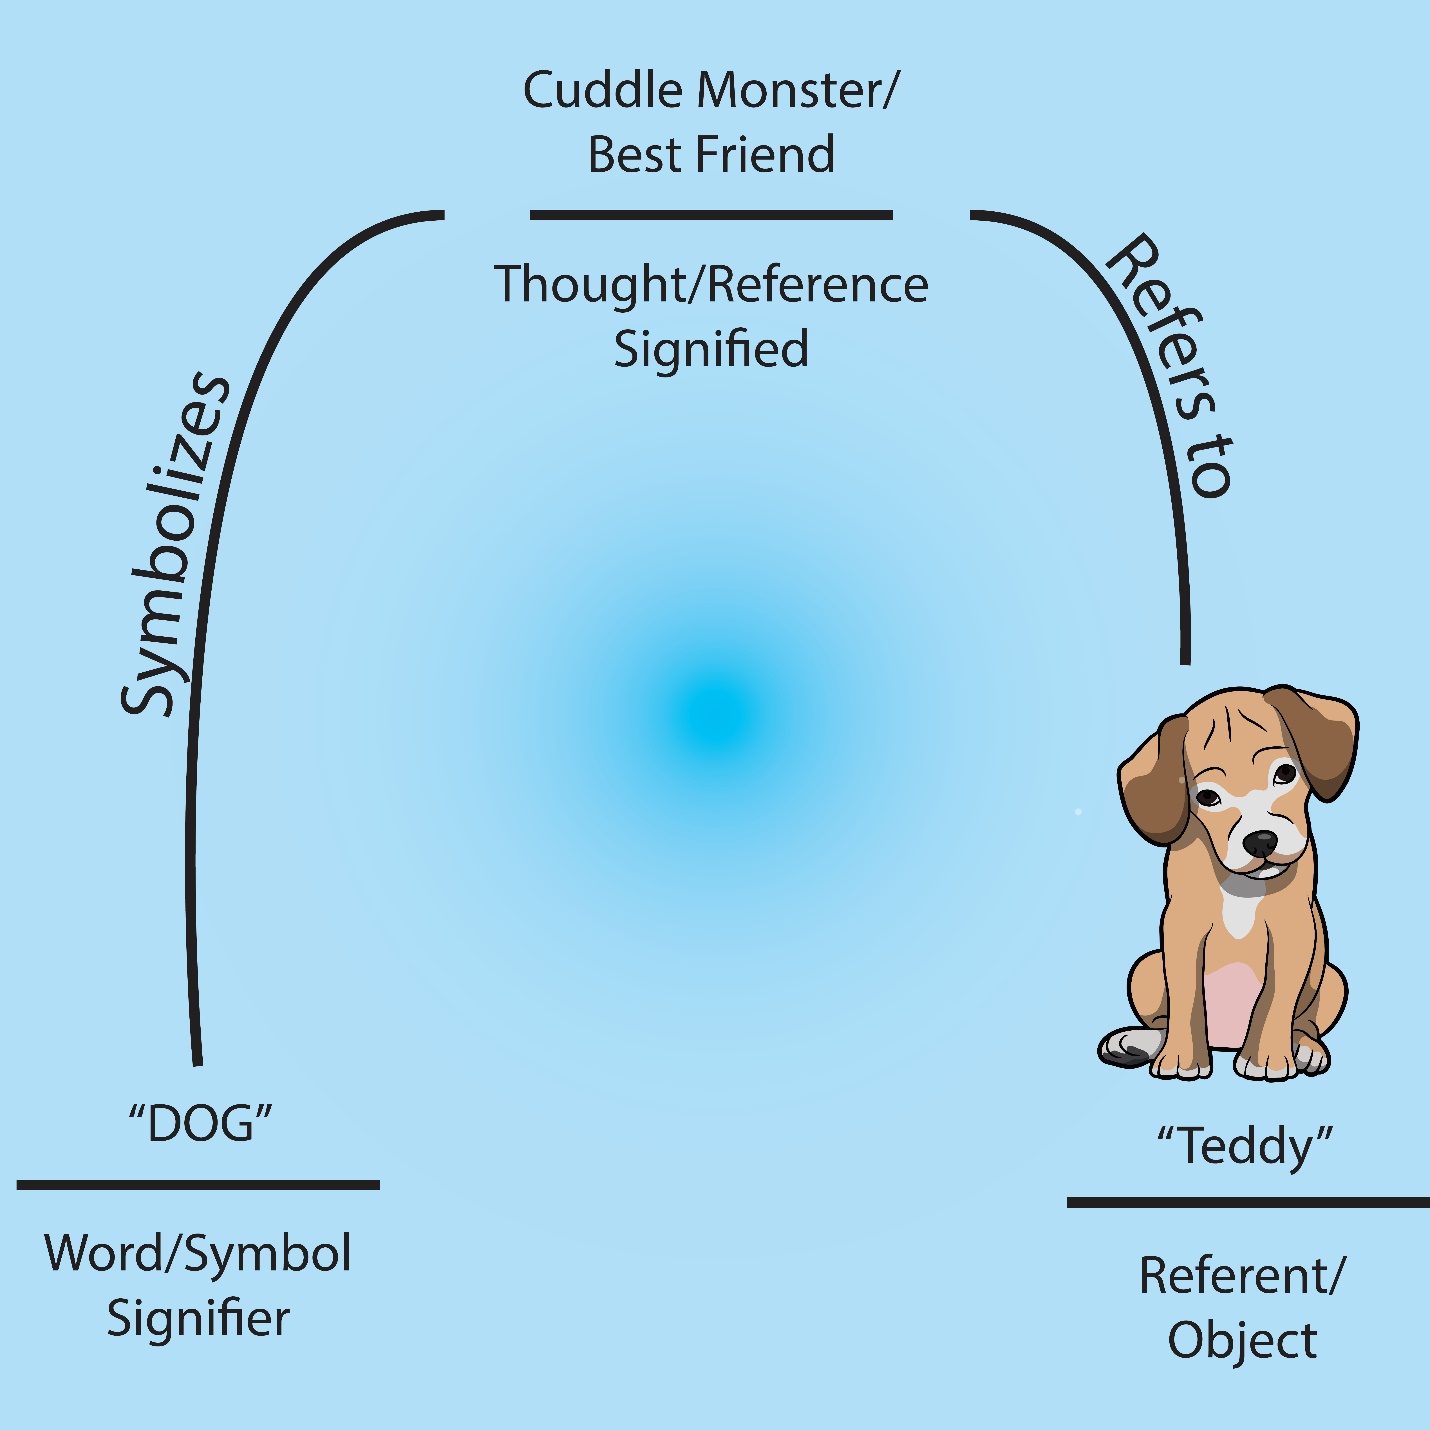 A line runs from the word &quot;Dog&quot; to a drawing of a puppy and the name &quot;Teddy&quot;. &quot;Dog&quot; is labeled &quot;word/symbol signifier&quot; and &quot;Teddy&quot; is labeled &quot;referent/object&quot;. The line is annotated with &quot;symbolizes&quot; &quot;Cuddle Monster/Best Friend: Though/ reference signified&quot; &quot;refers to&quot; pointing to the picture of the puppy.